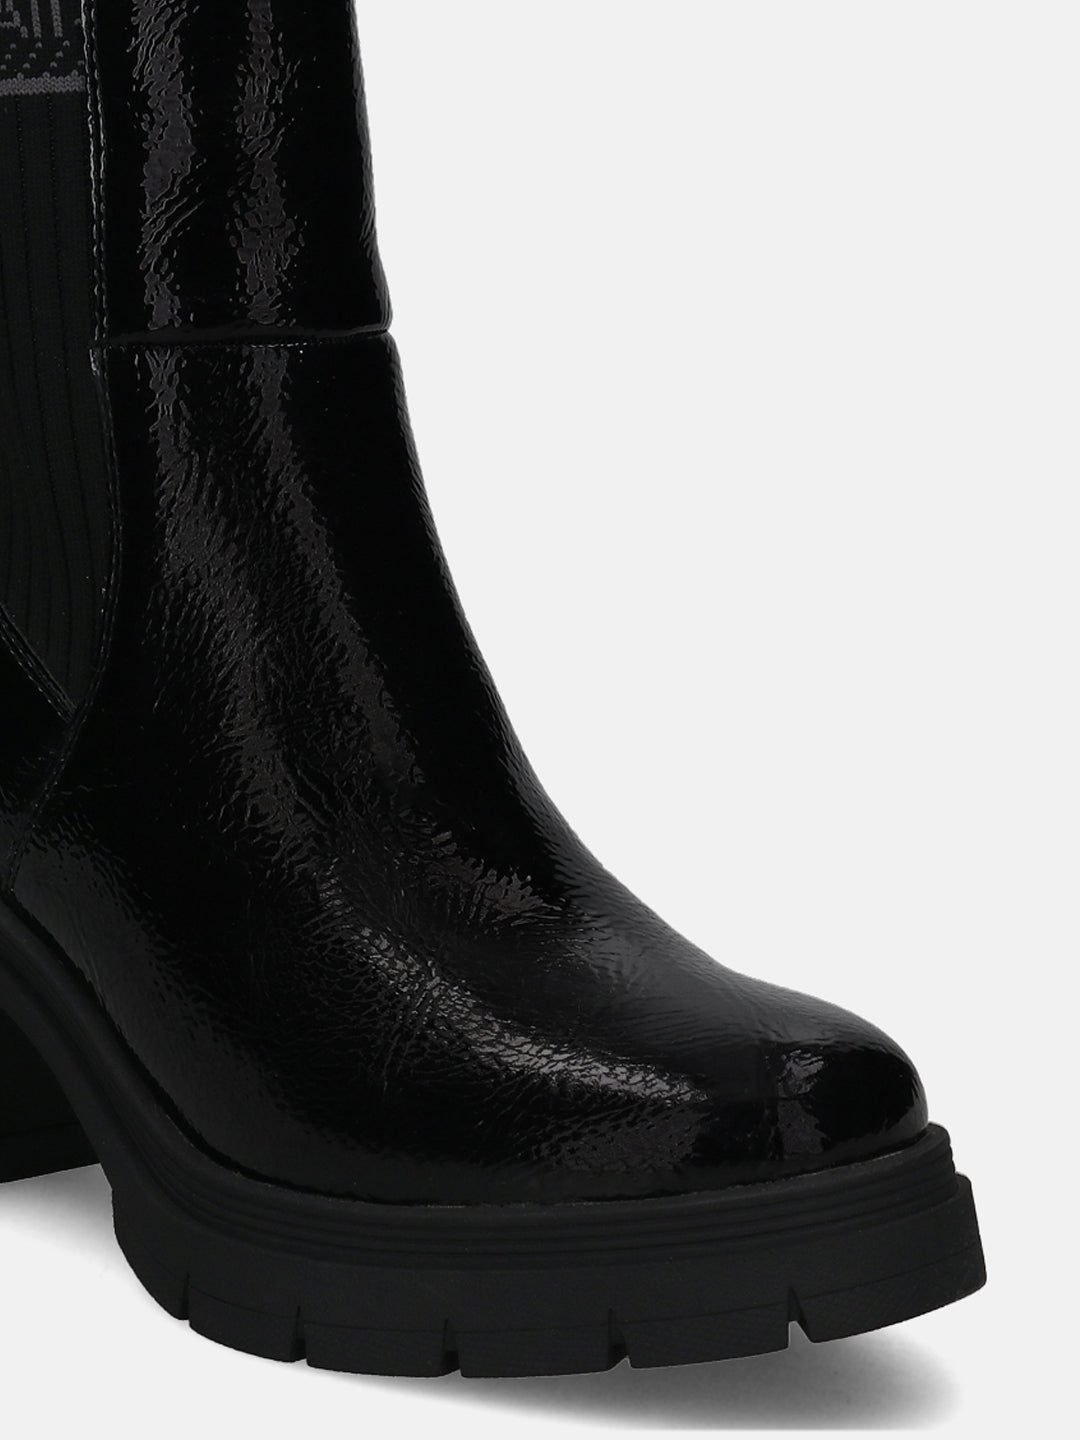 Joely Black Chelsea Boots